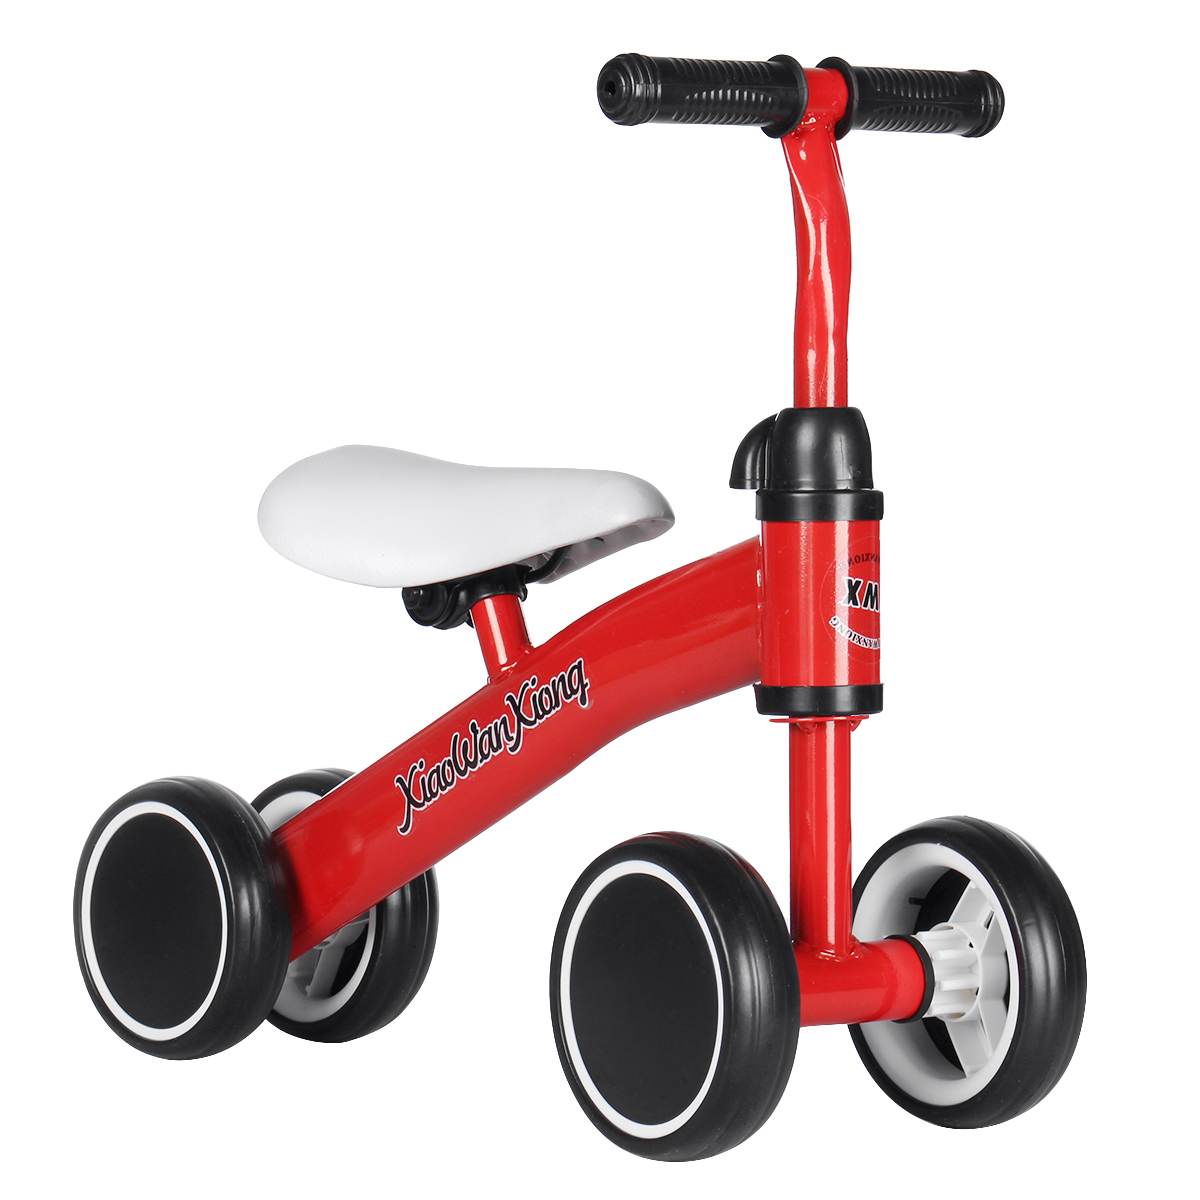 (Out of Stock) Baby Balance Bike Walker Kids Ride on Cars Toy for Learning Walk Scooter